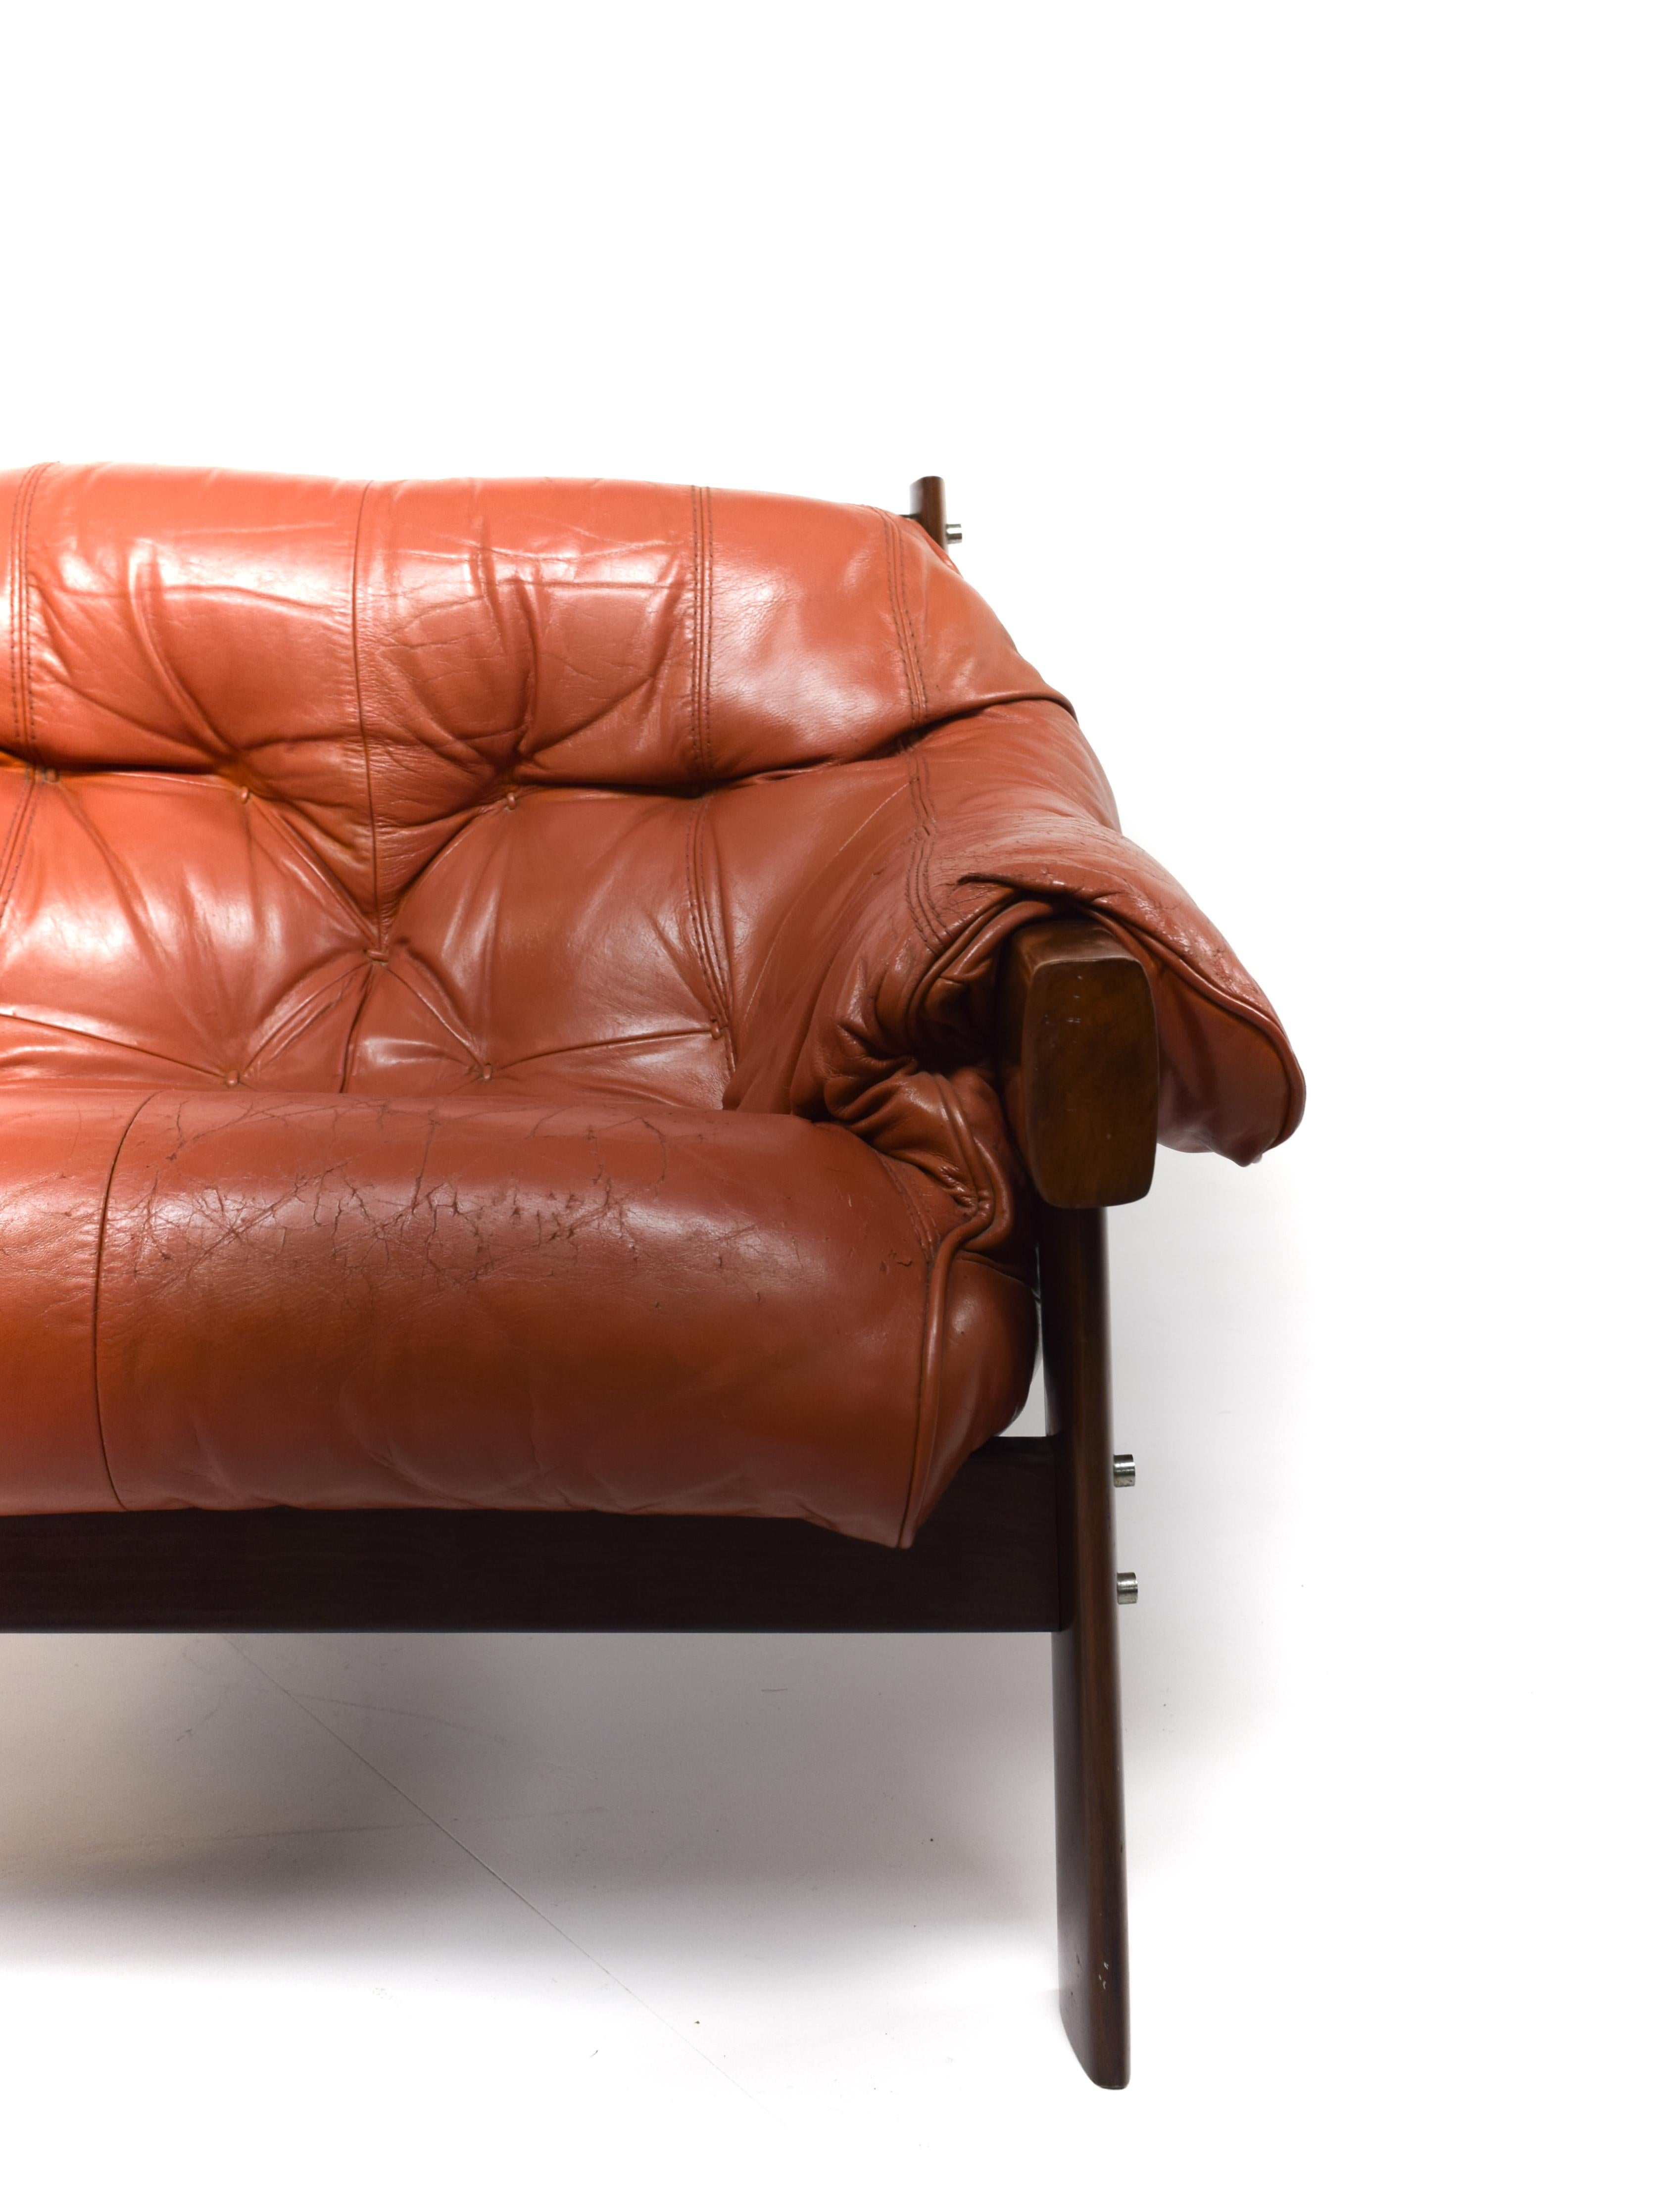 Percival Lafer Lounge Chair MP 41 in Leather and Jacaranda Wood, Brazil, 1960s 1